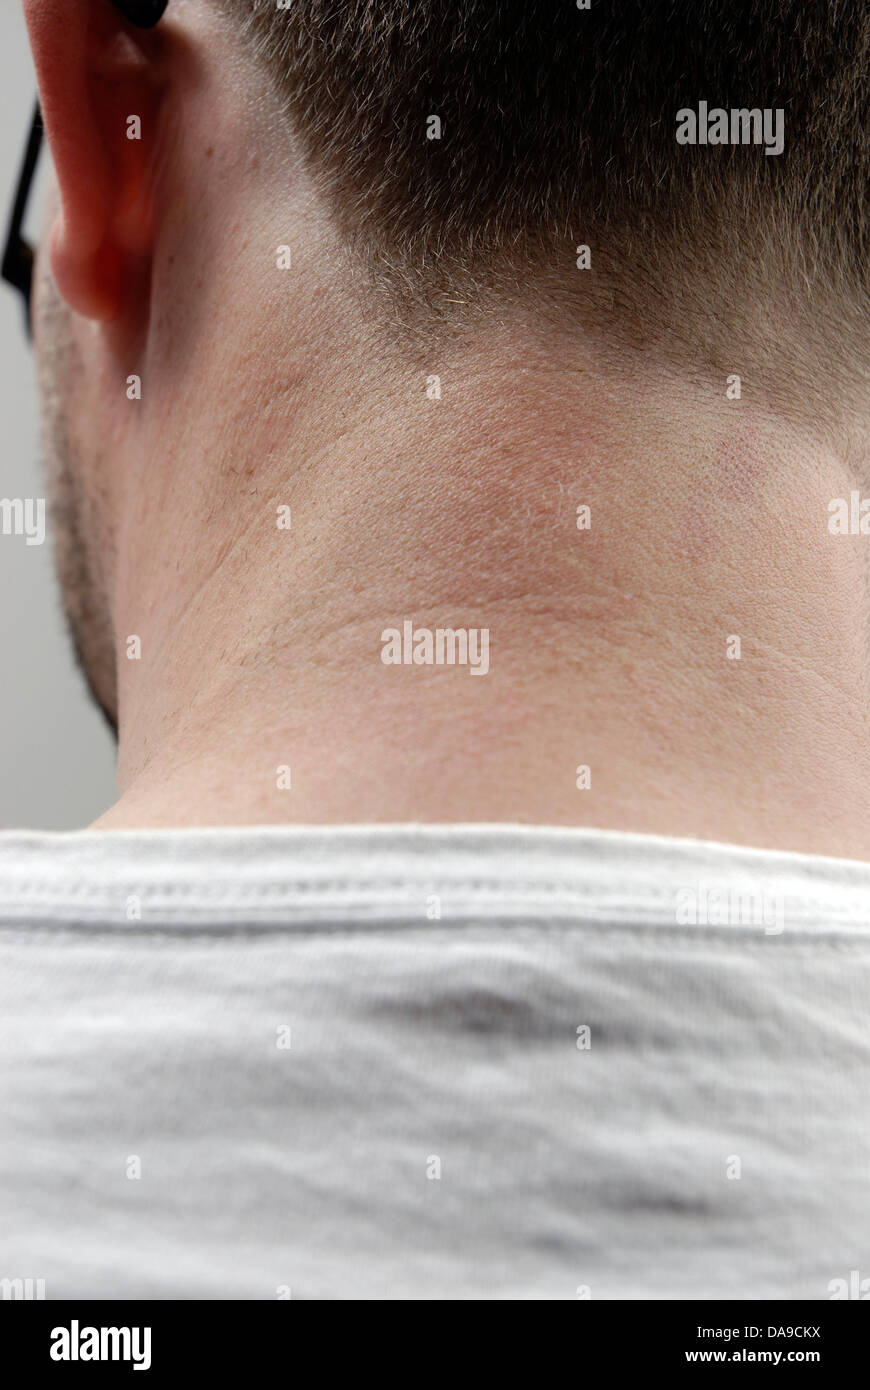 Neck of a man Stock Photo